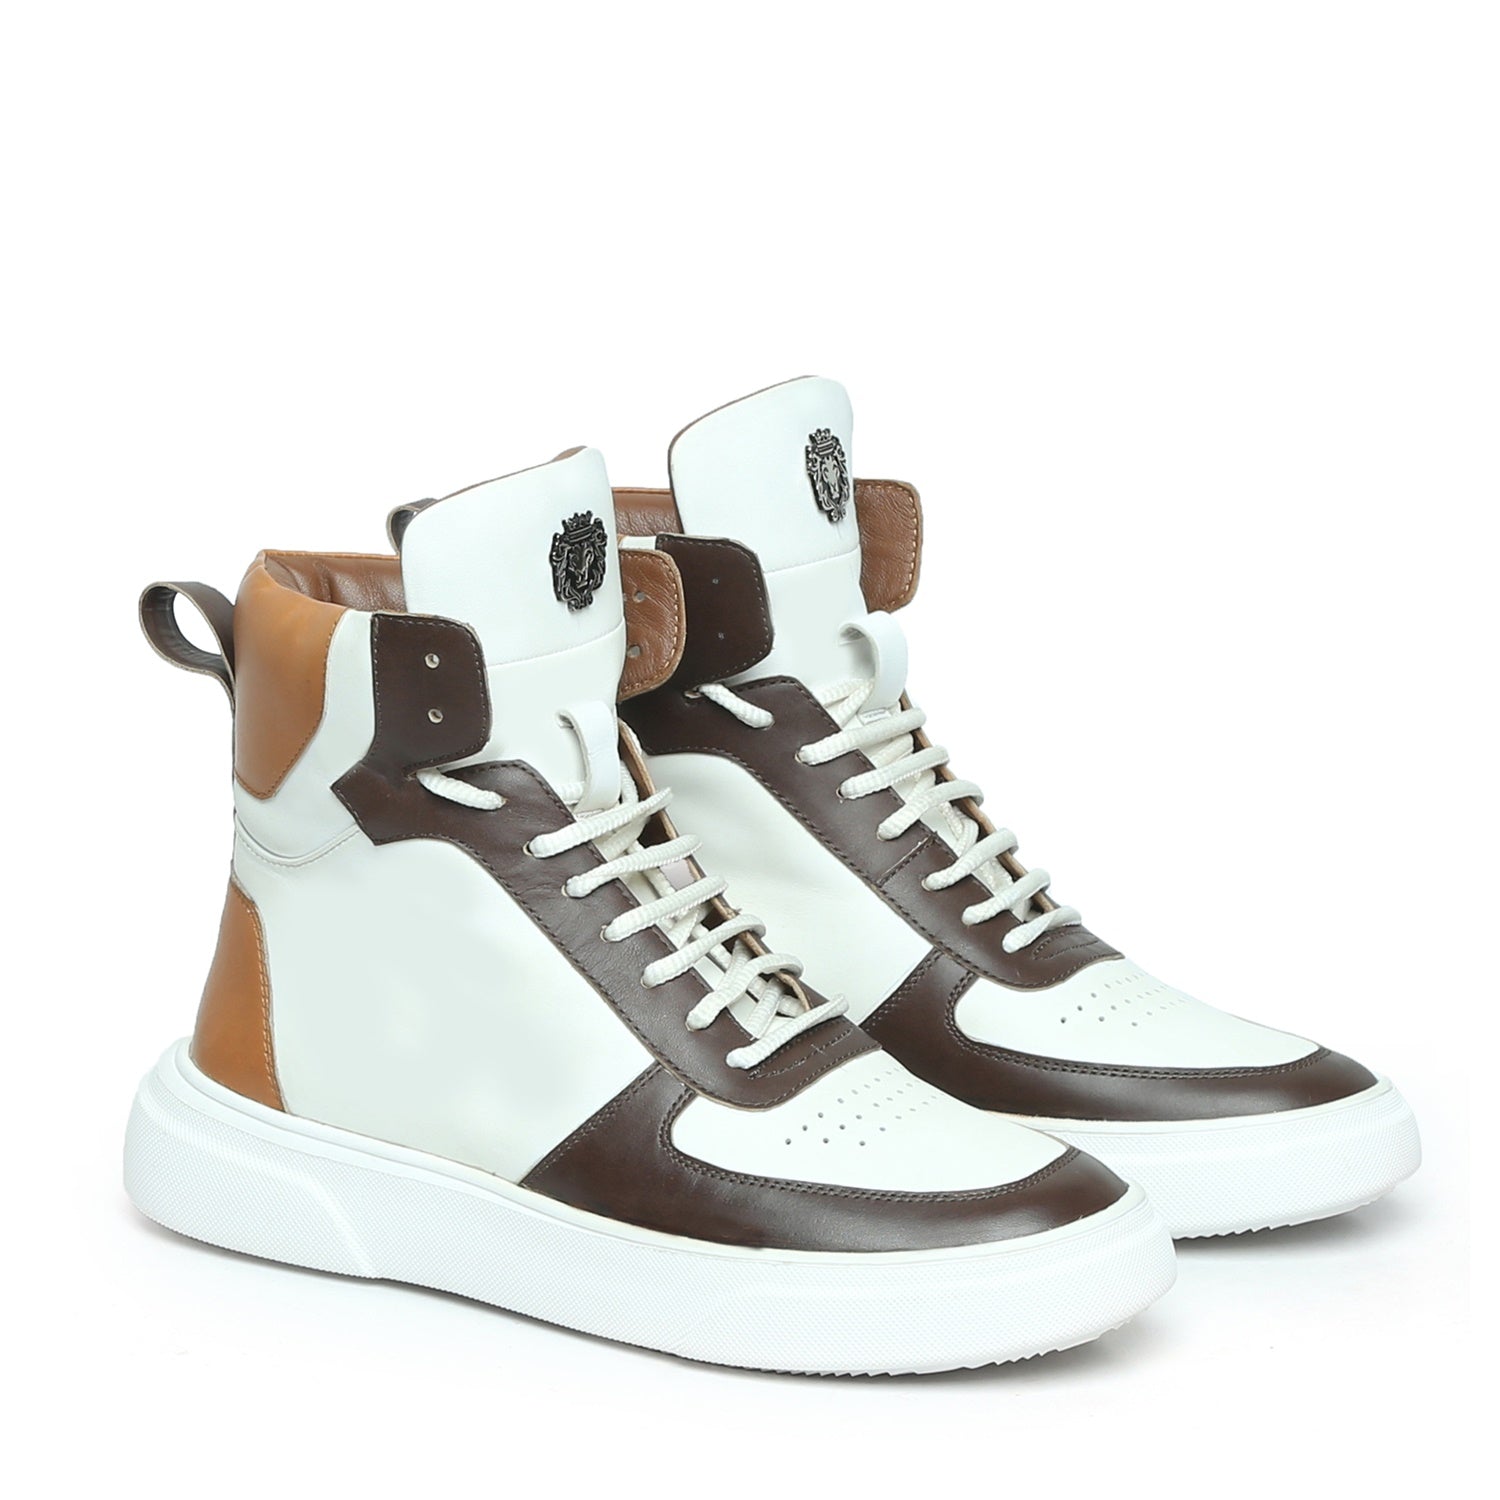 Contrasting Brown & Tan Leather Sneakers White High Ankle by Brune & Bareskin